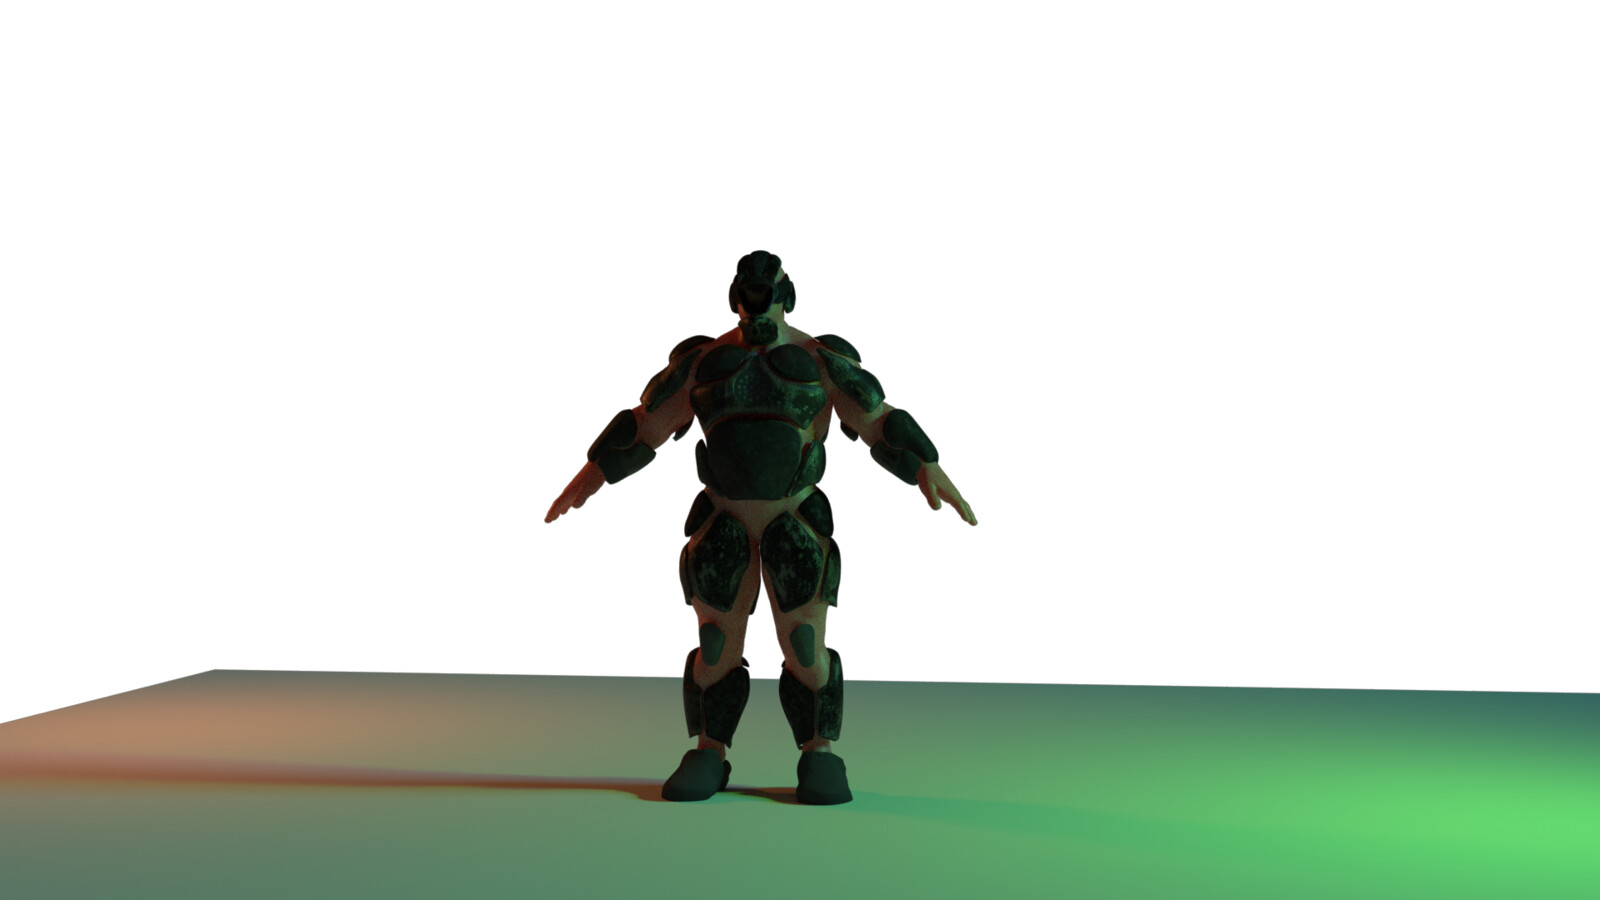 Fitted and modeled for bulky frame characters. Cycles render